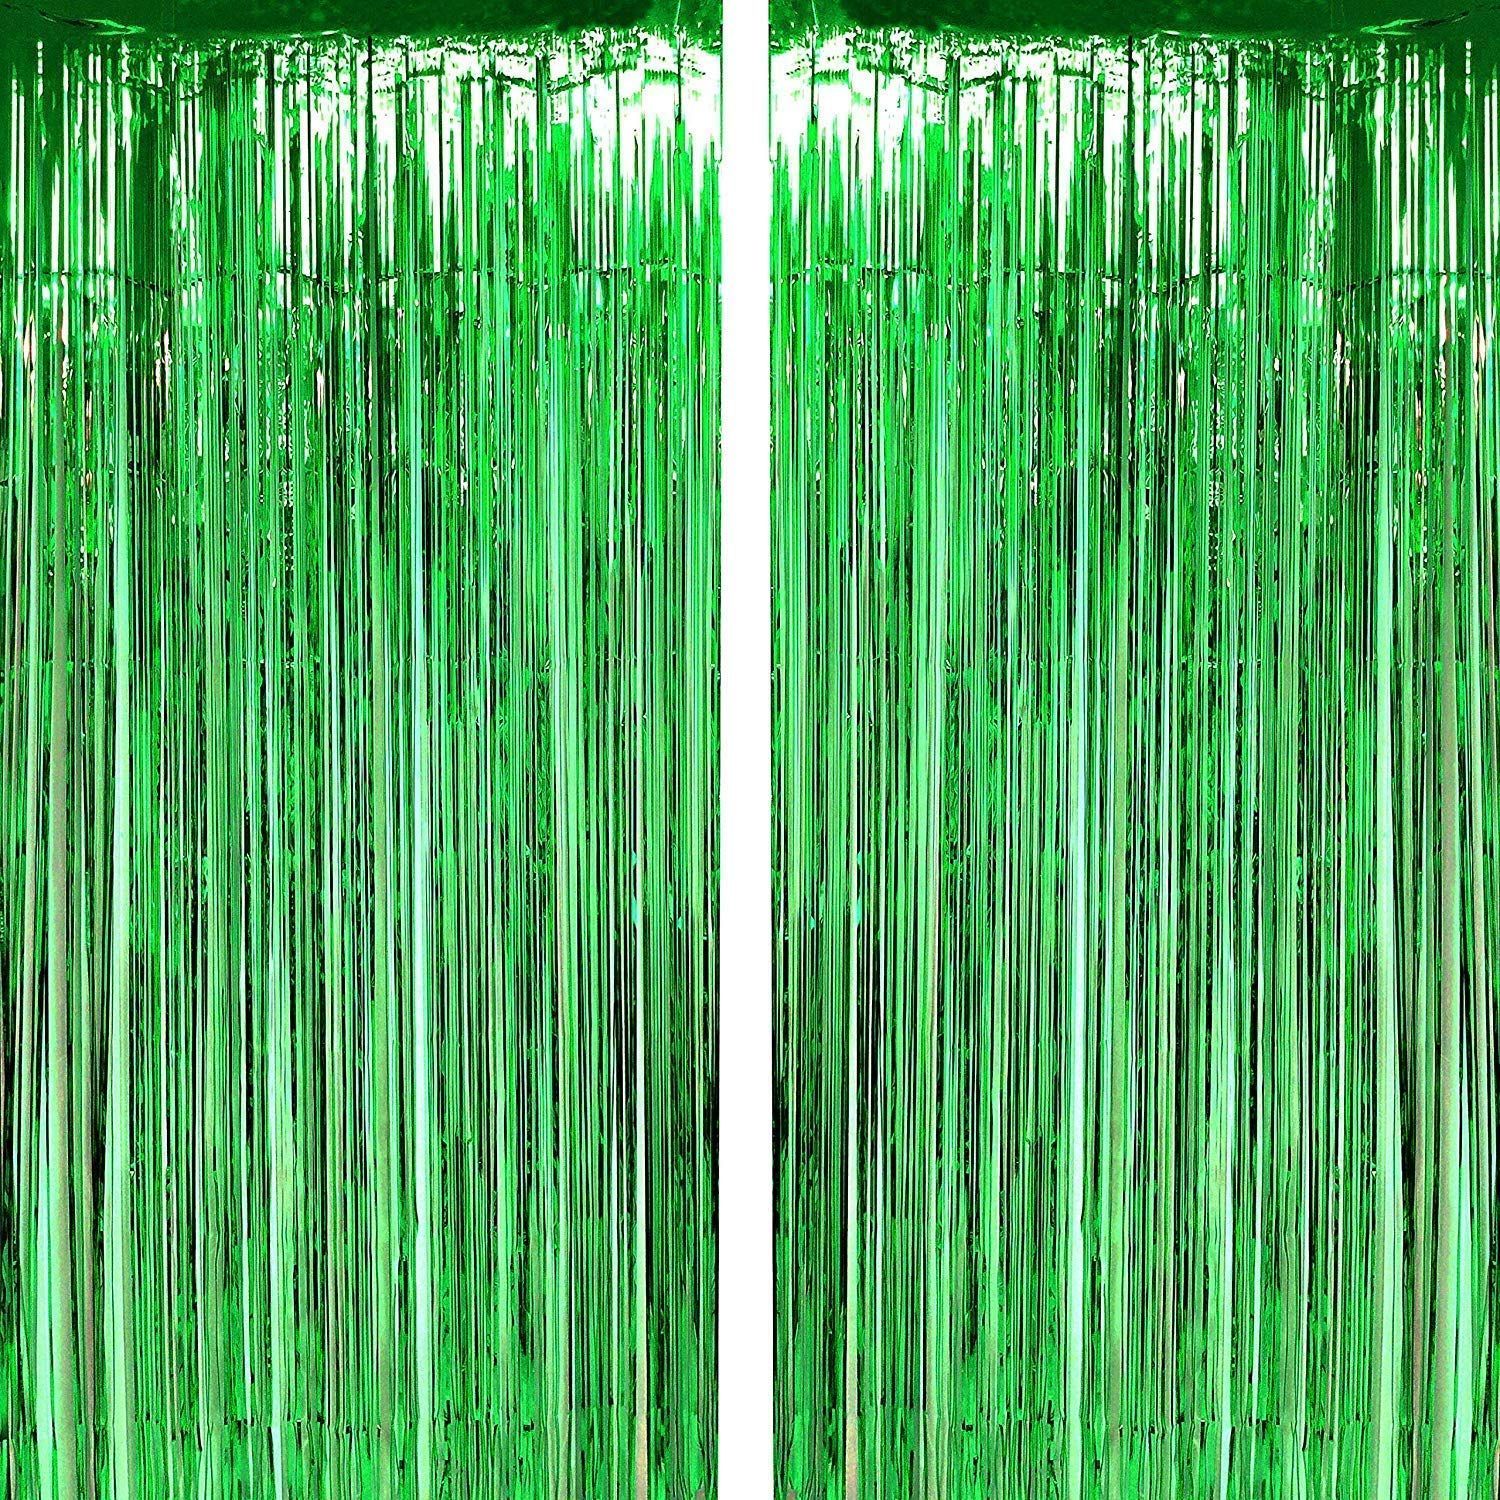 BLODLE Green Fringe Foil Curtains, 2 Pack Green Backdrop Foil Curtains, Metallic Backdrop Streamer for Baby Shower, Party Birthday - (Pack of 2 Pcs)